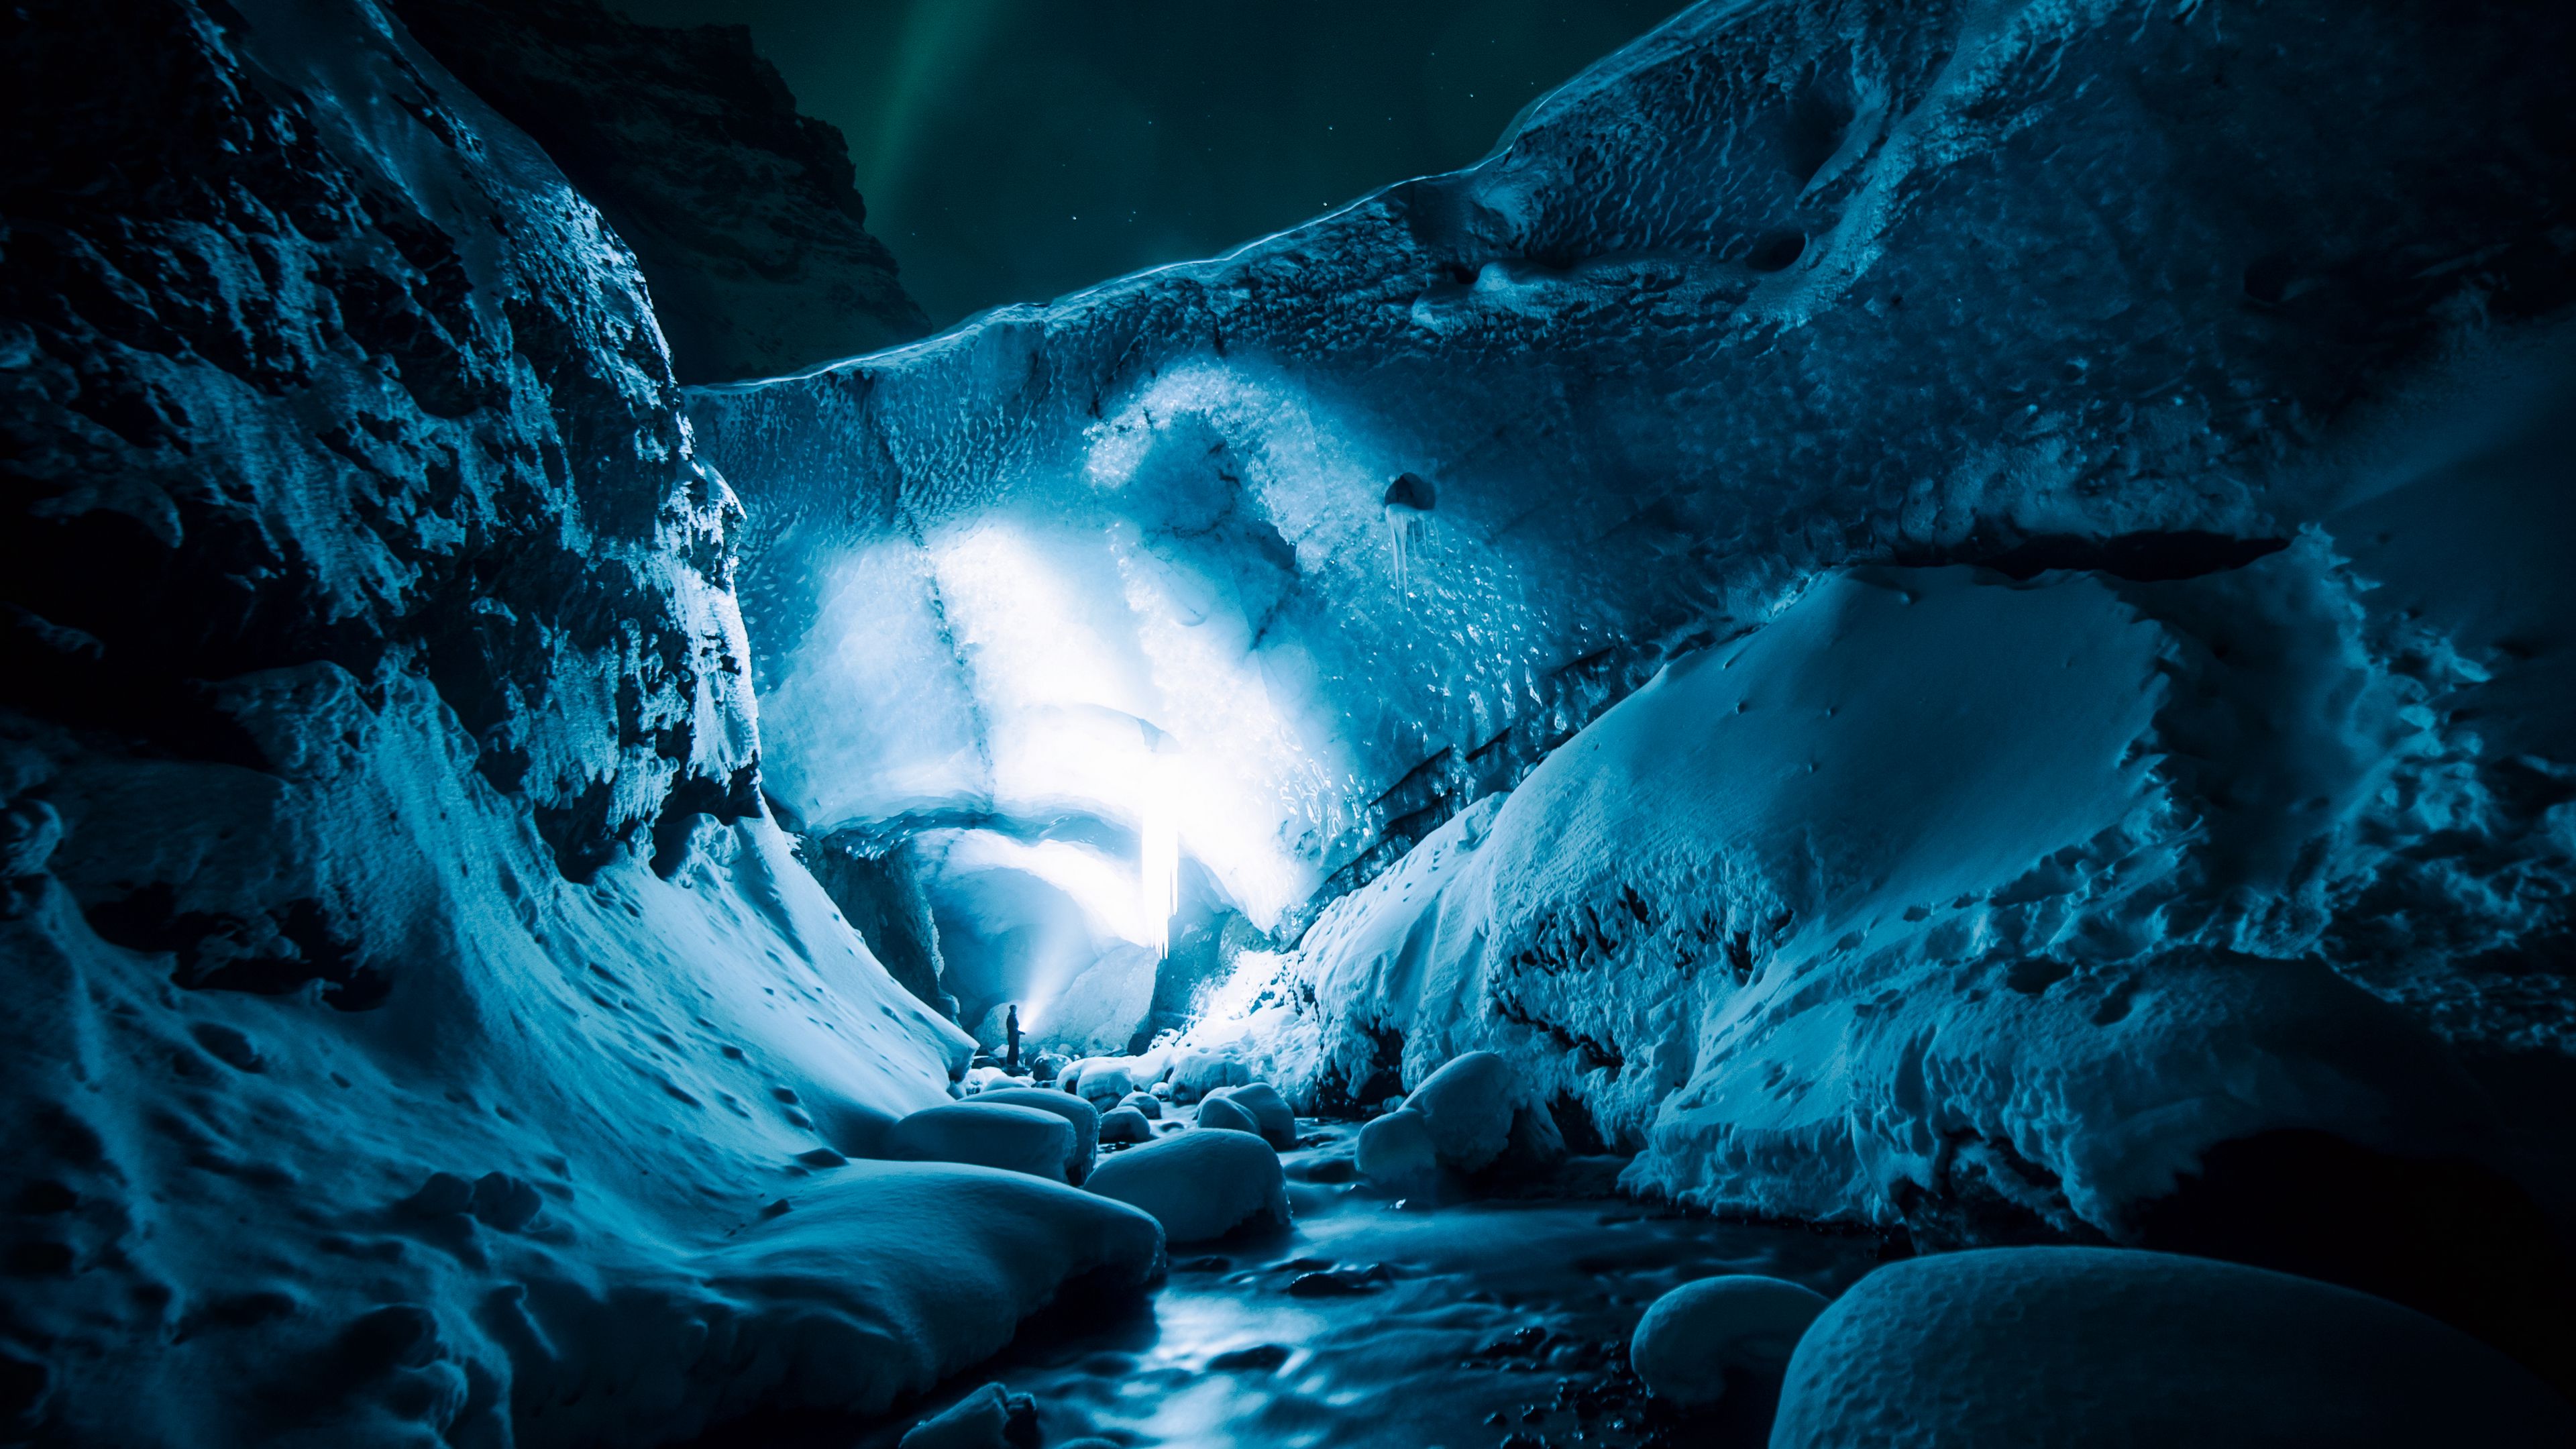 Download 3840x2160 ice cave, night, ice wallpaper, background 4k uhd 16:9.